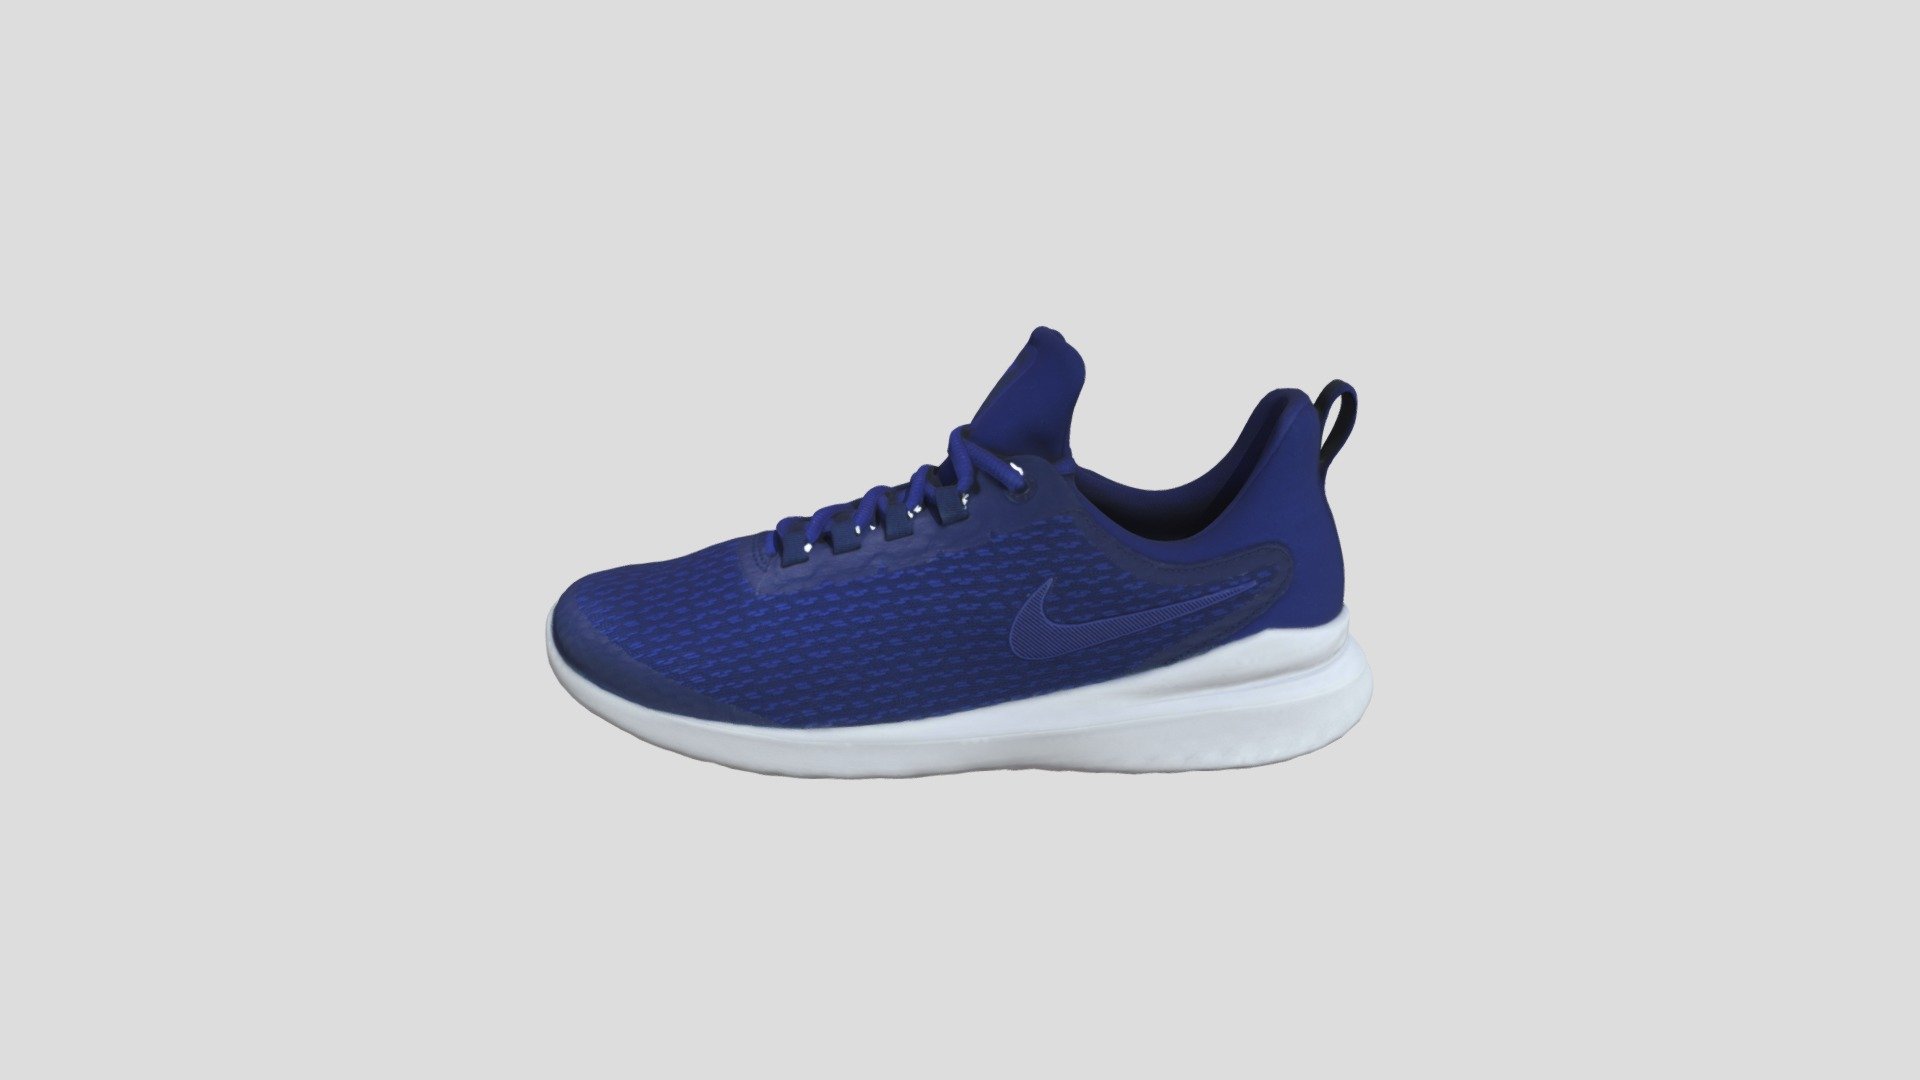 This model was created firstly by 3D scanning on retail version, and then being detail-improved manually, thus a 1:1 repulica of the original
PBR ready
Low-poly
4K texture
Welcome to check out other models we have to offer. And we do accept custom orders as well :) - Nike Renew Rival 黑蓝_AA7400-401 - Buy Royalty Free 3D model by TRARGUS 3d model